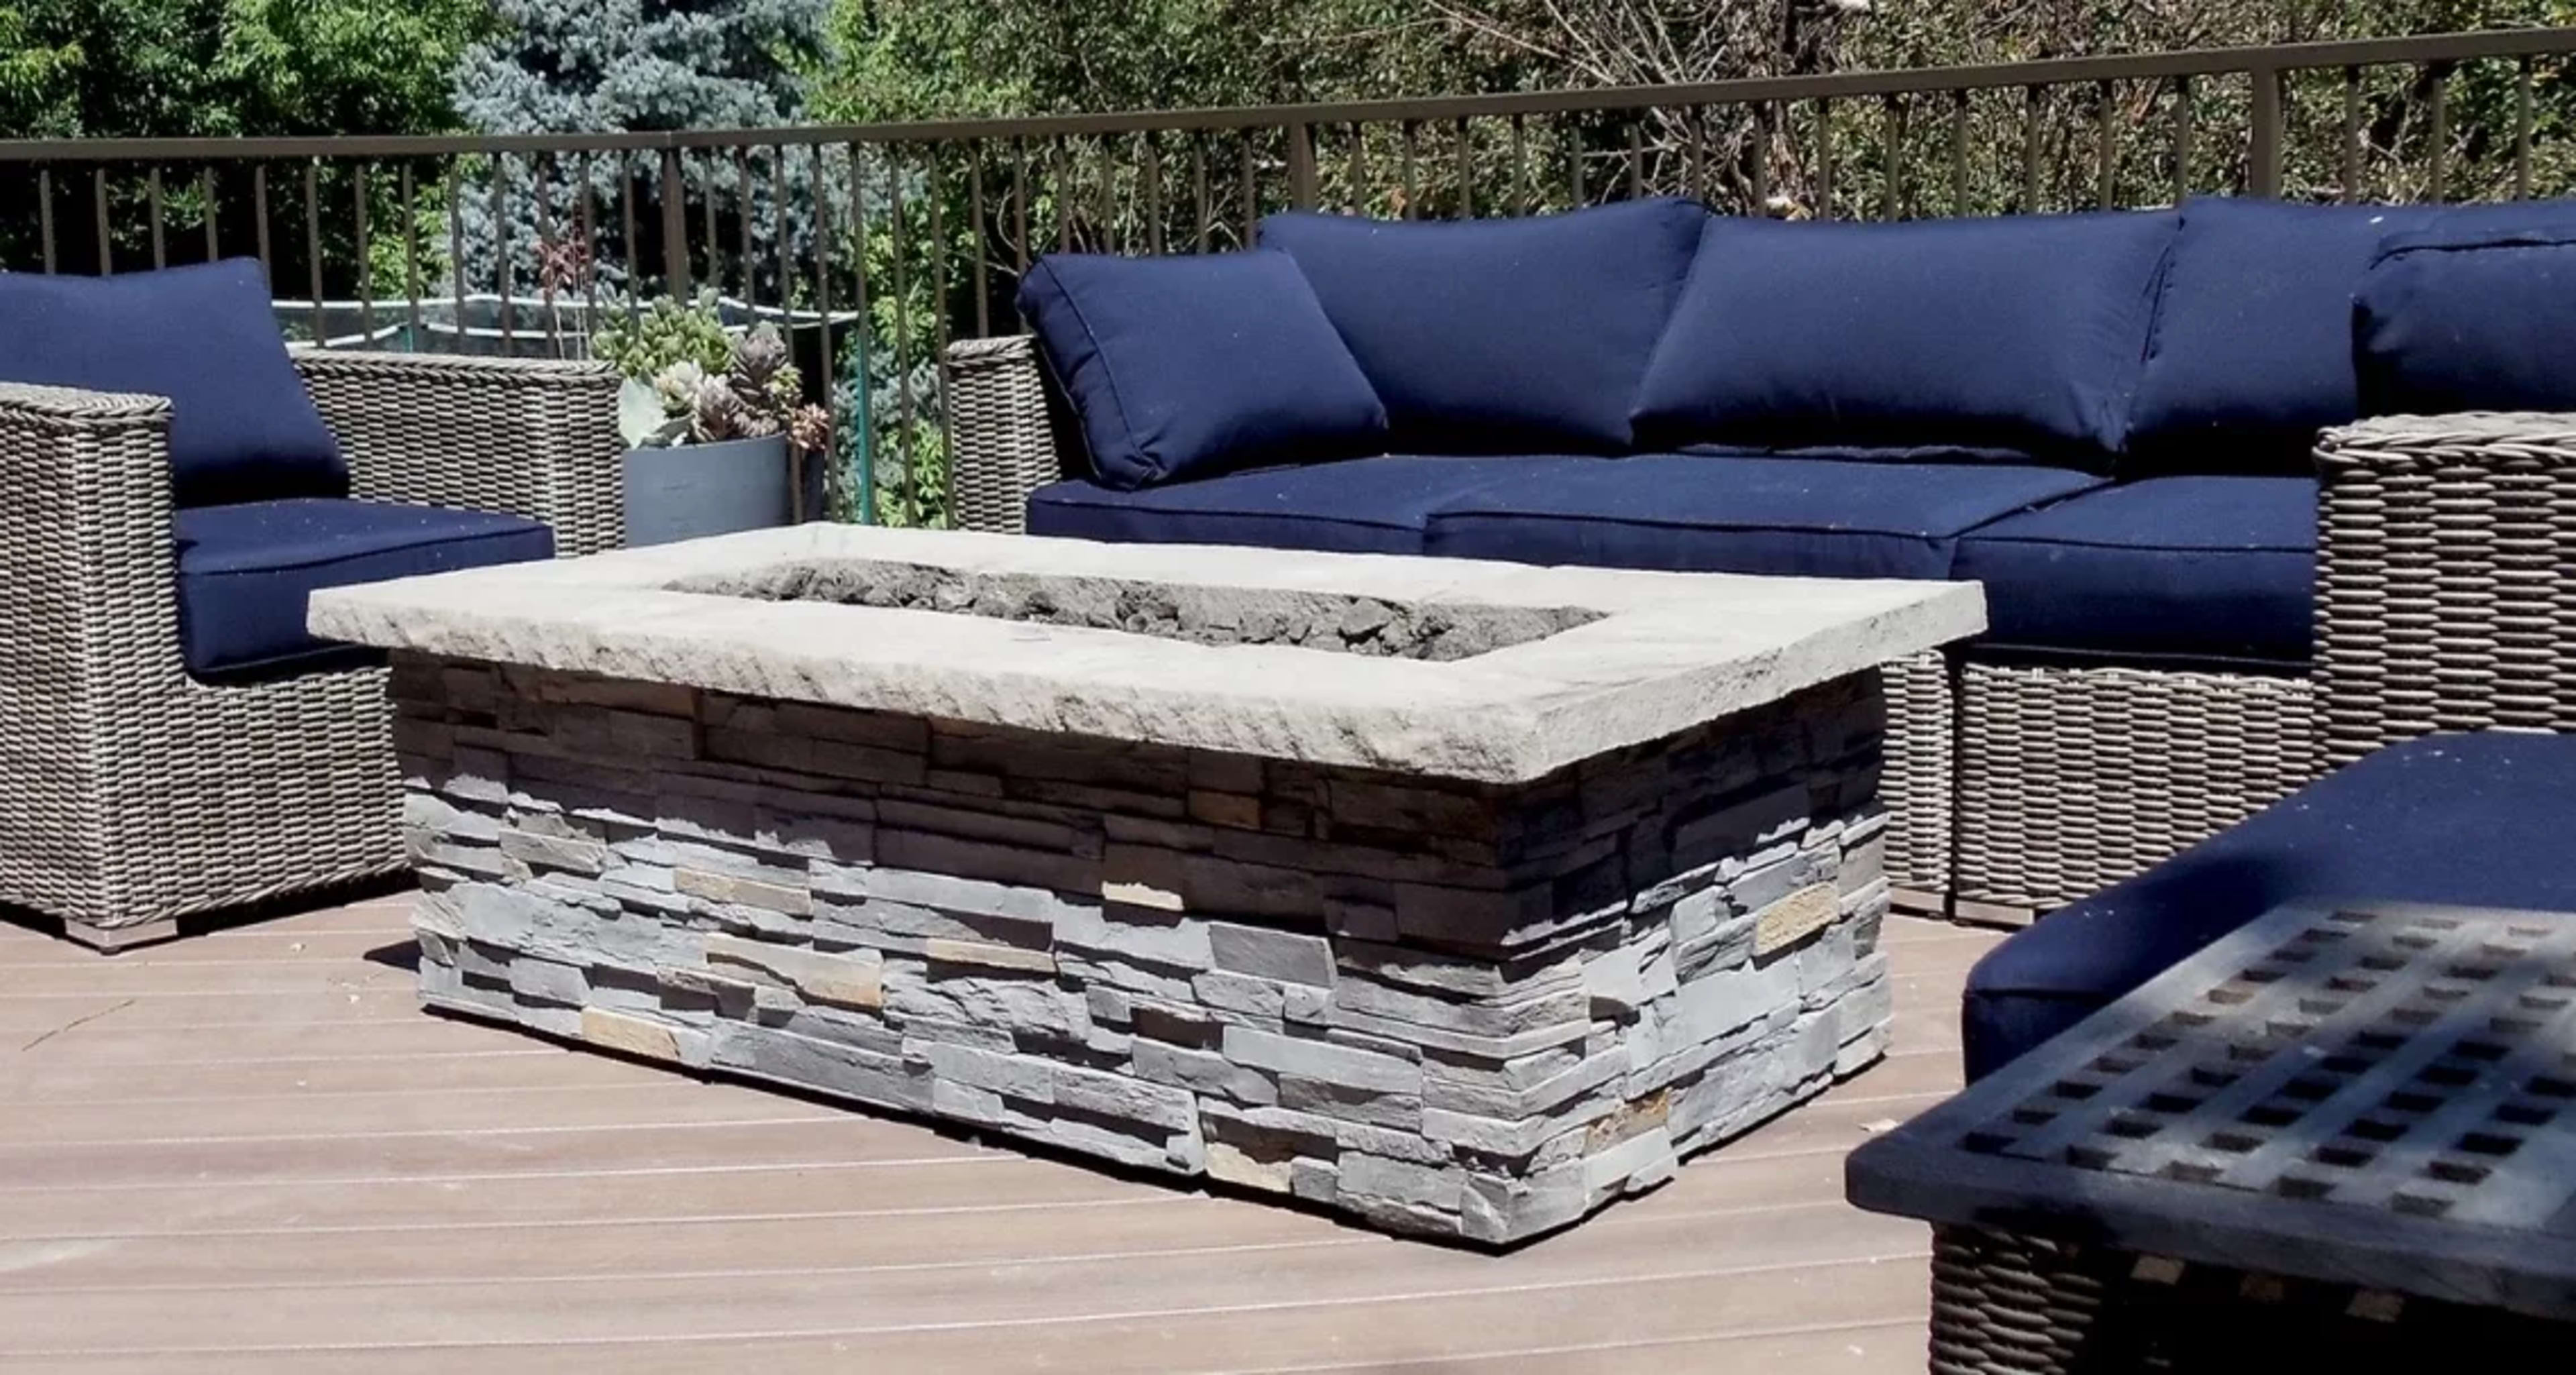 <p>For over 35 years, R&amp;R Living has been using artistic, thoughtful, and expressive design to craft functional and beautiful fire pits for outdoor living. Inspired by the native and timeless look of the Colorado landscape, R&amp;R Living’s customizable fire pits feature natural stone, simple shapes, and classic lines that reflect the natural beauty of nature.</p>